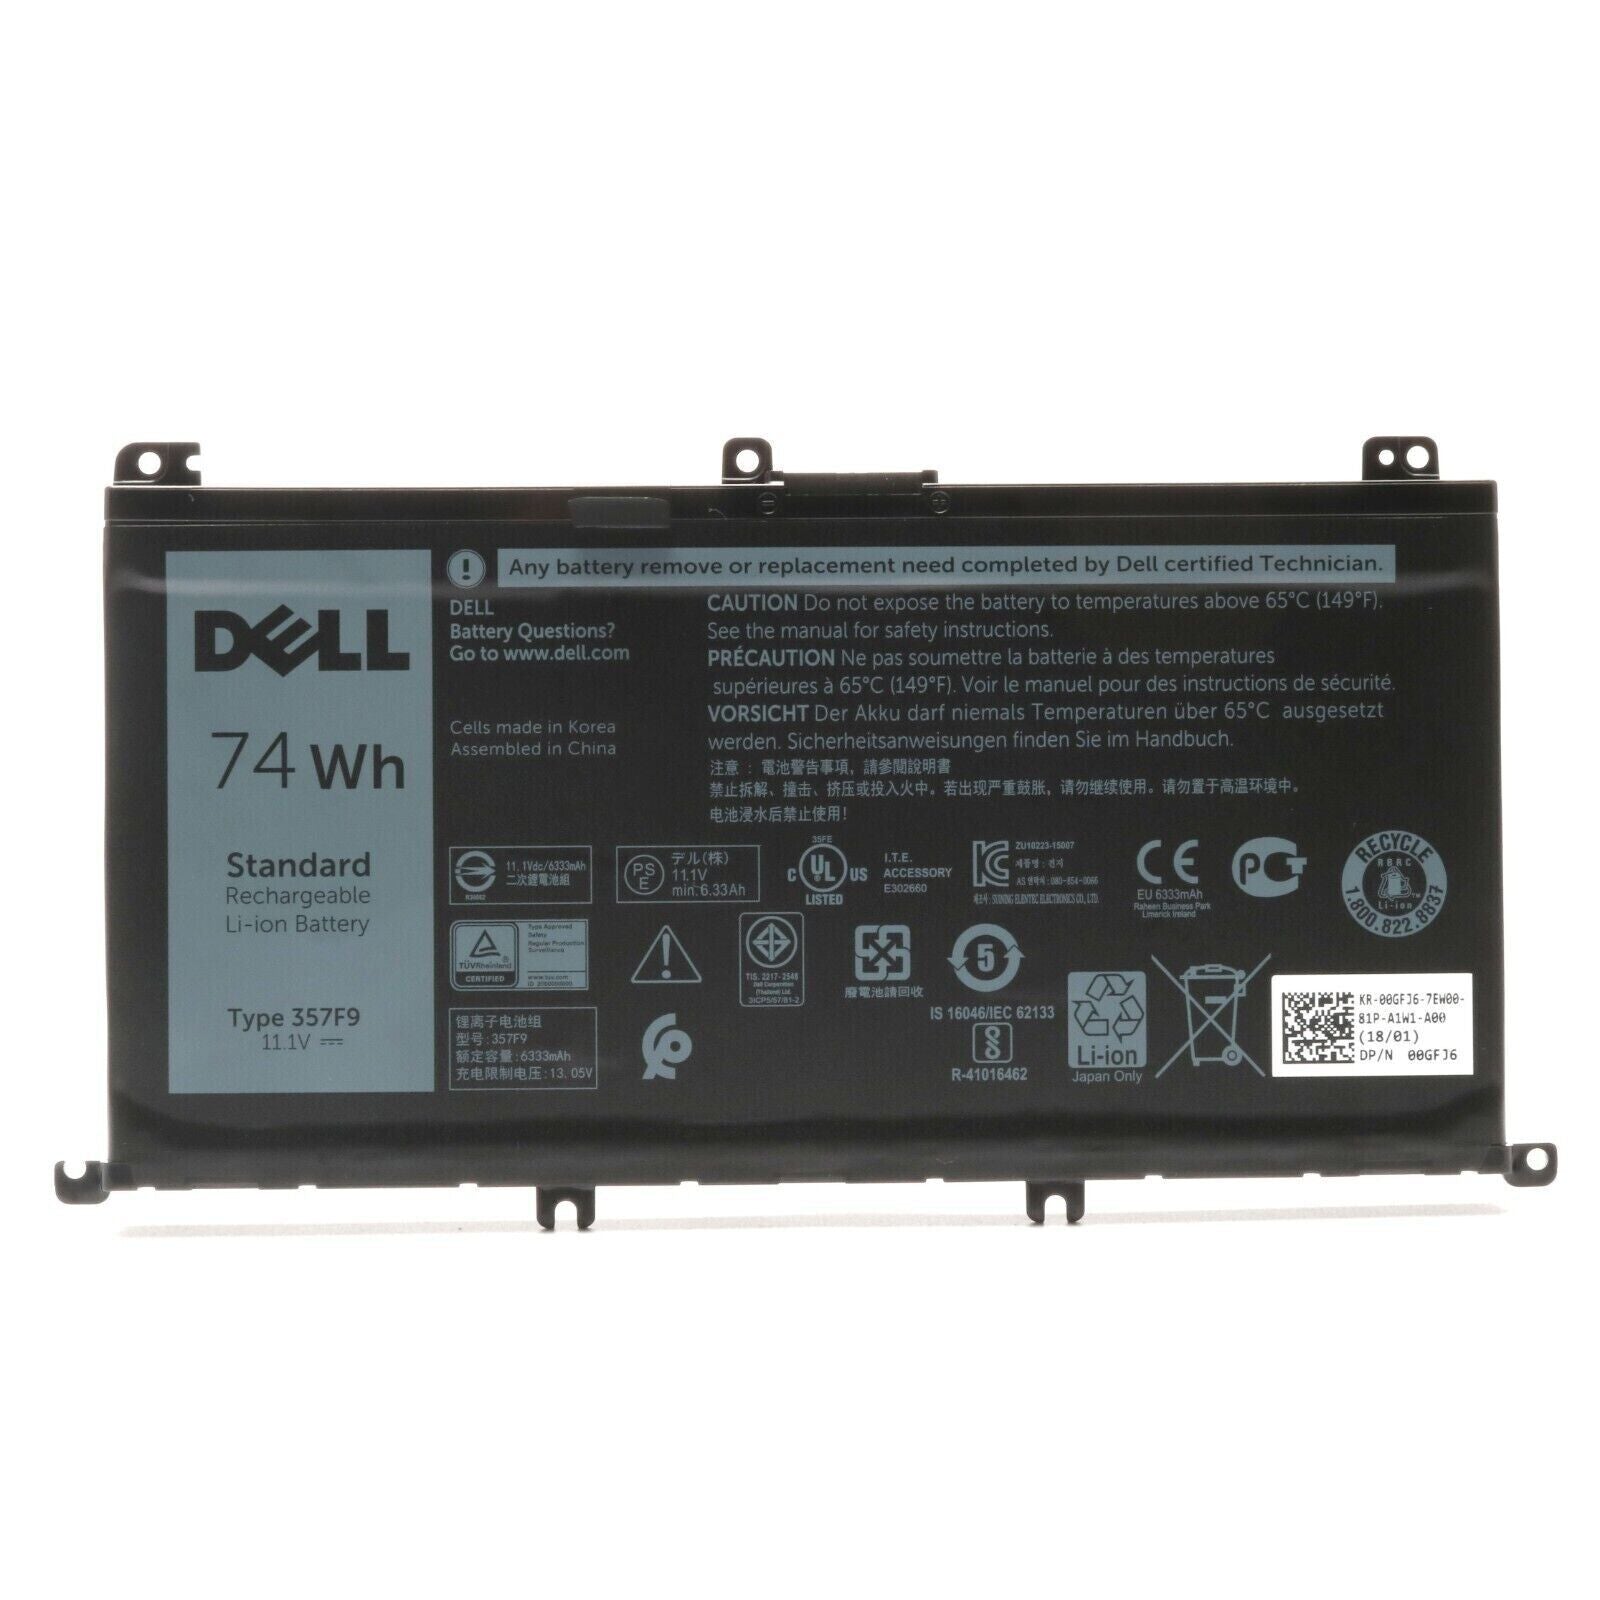 Dell 0357F9 357F9 6-Cells 74Wh Laptop Battery for Inspiron 15 (7559)